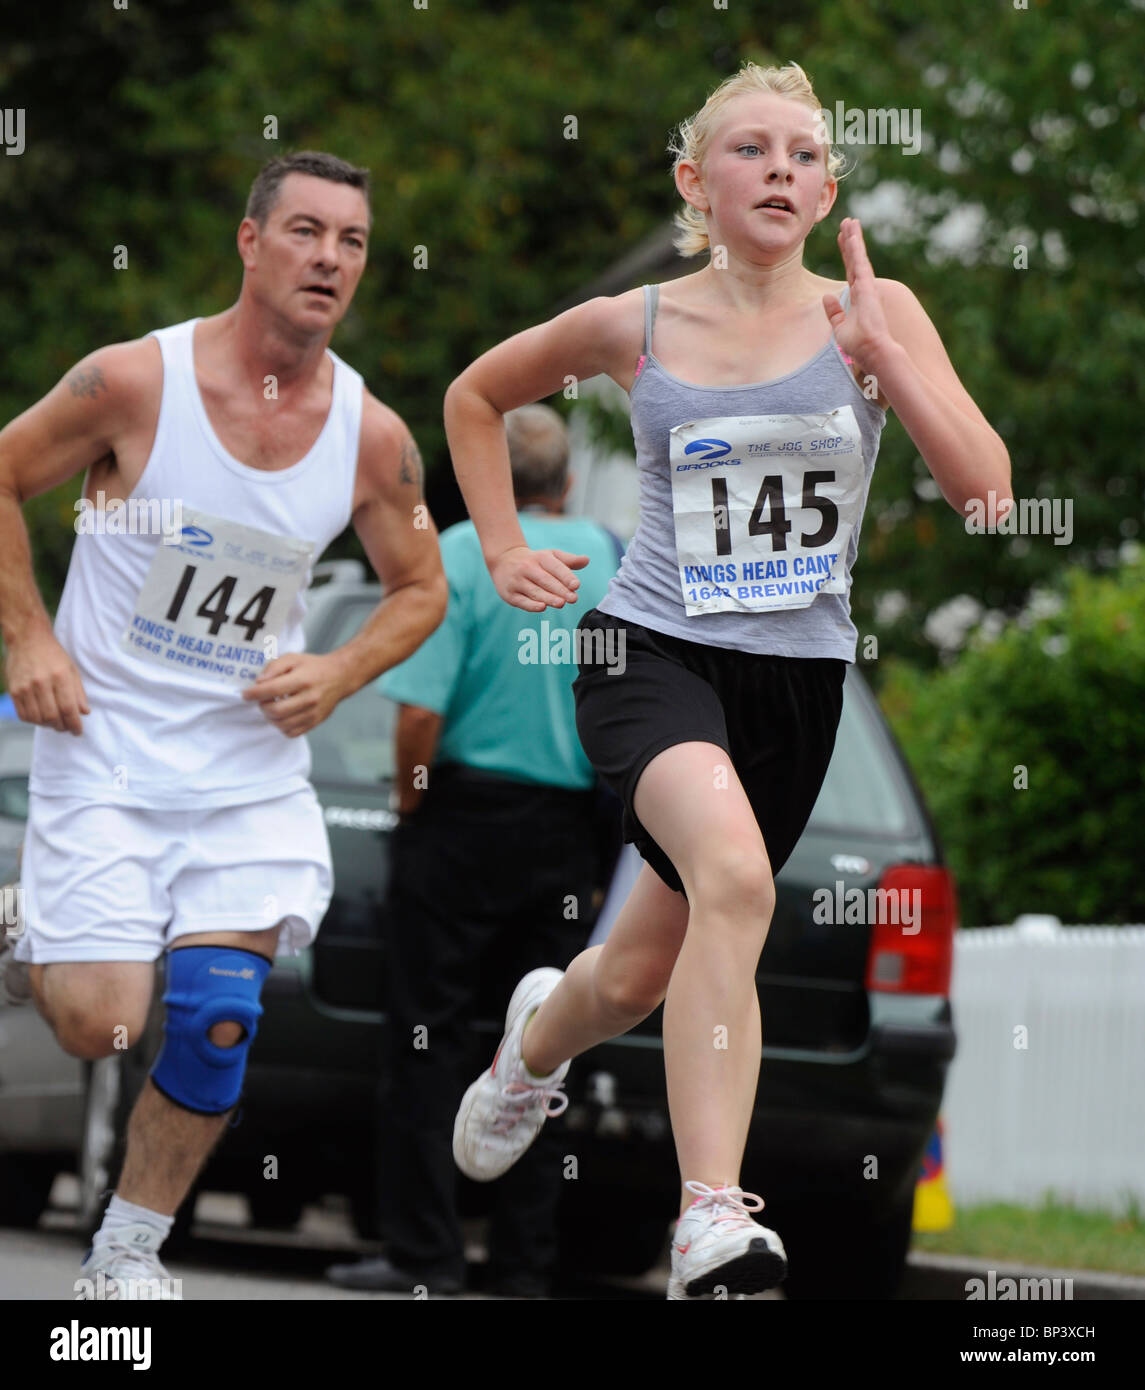 Competitors on the annual Kings Head Canter. A run between the villages of Chiddingly and East Hoathly. Stock Photo